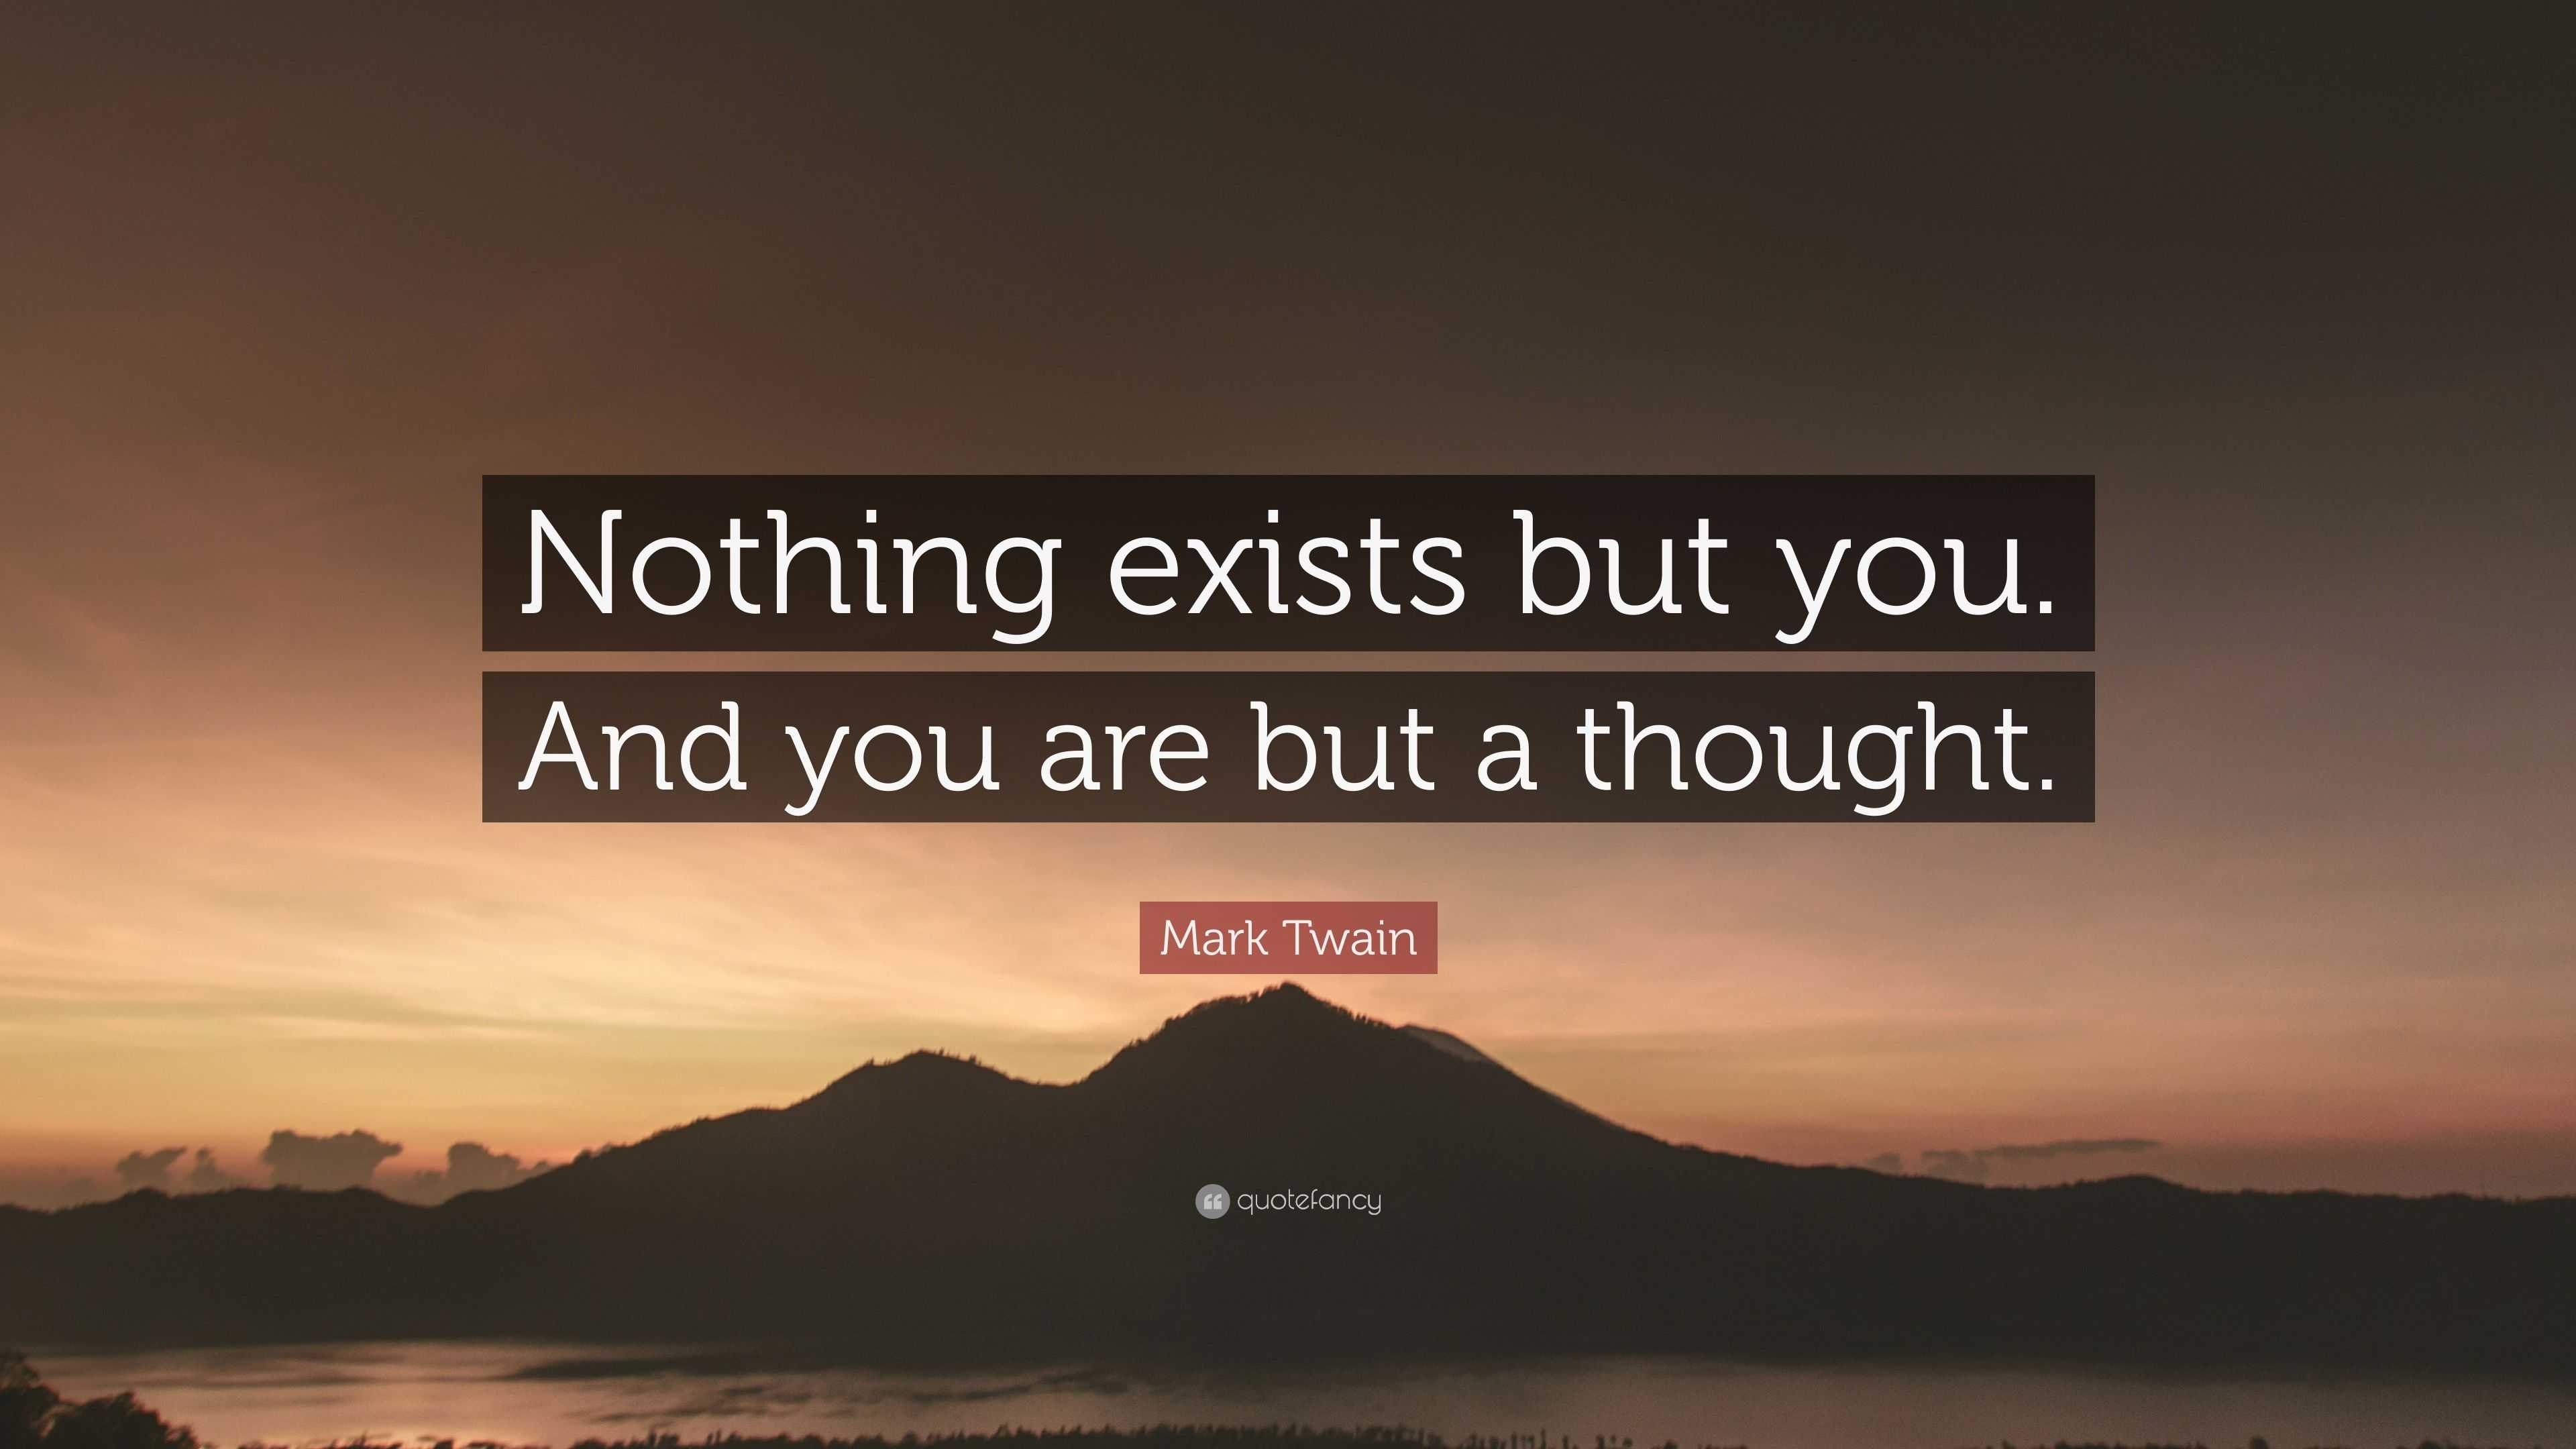 Mark Twain Quote: “Nothing exists but you. And you are but a thought.”